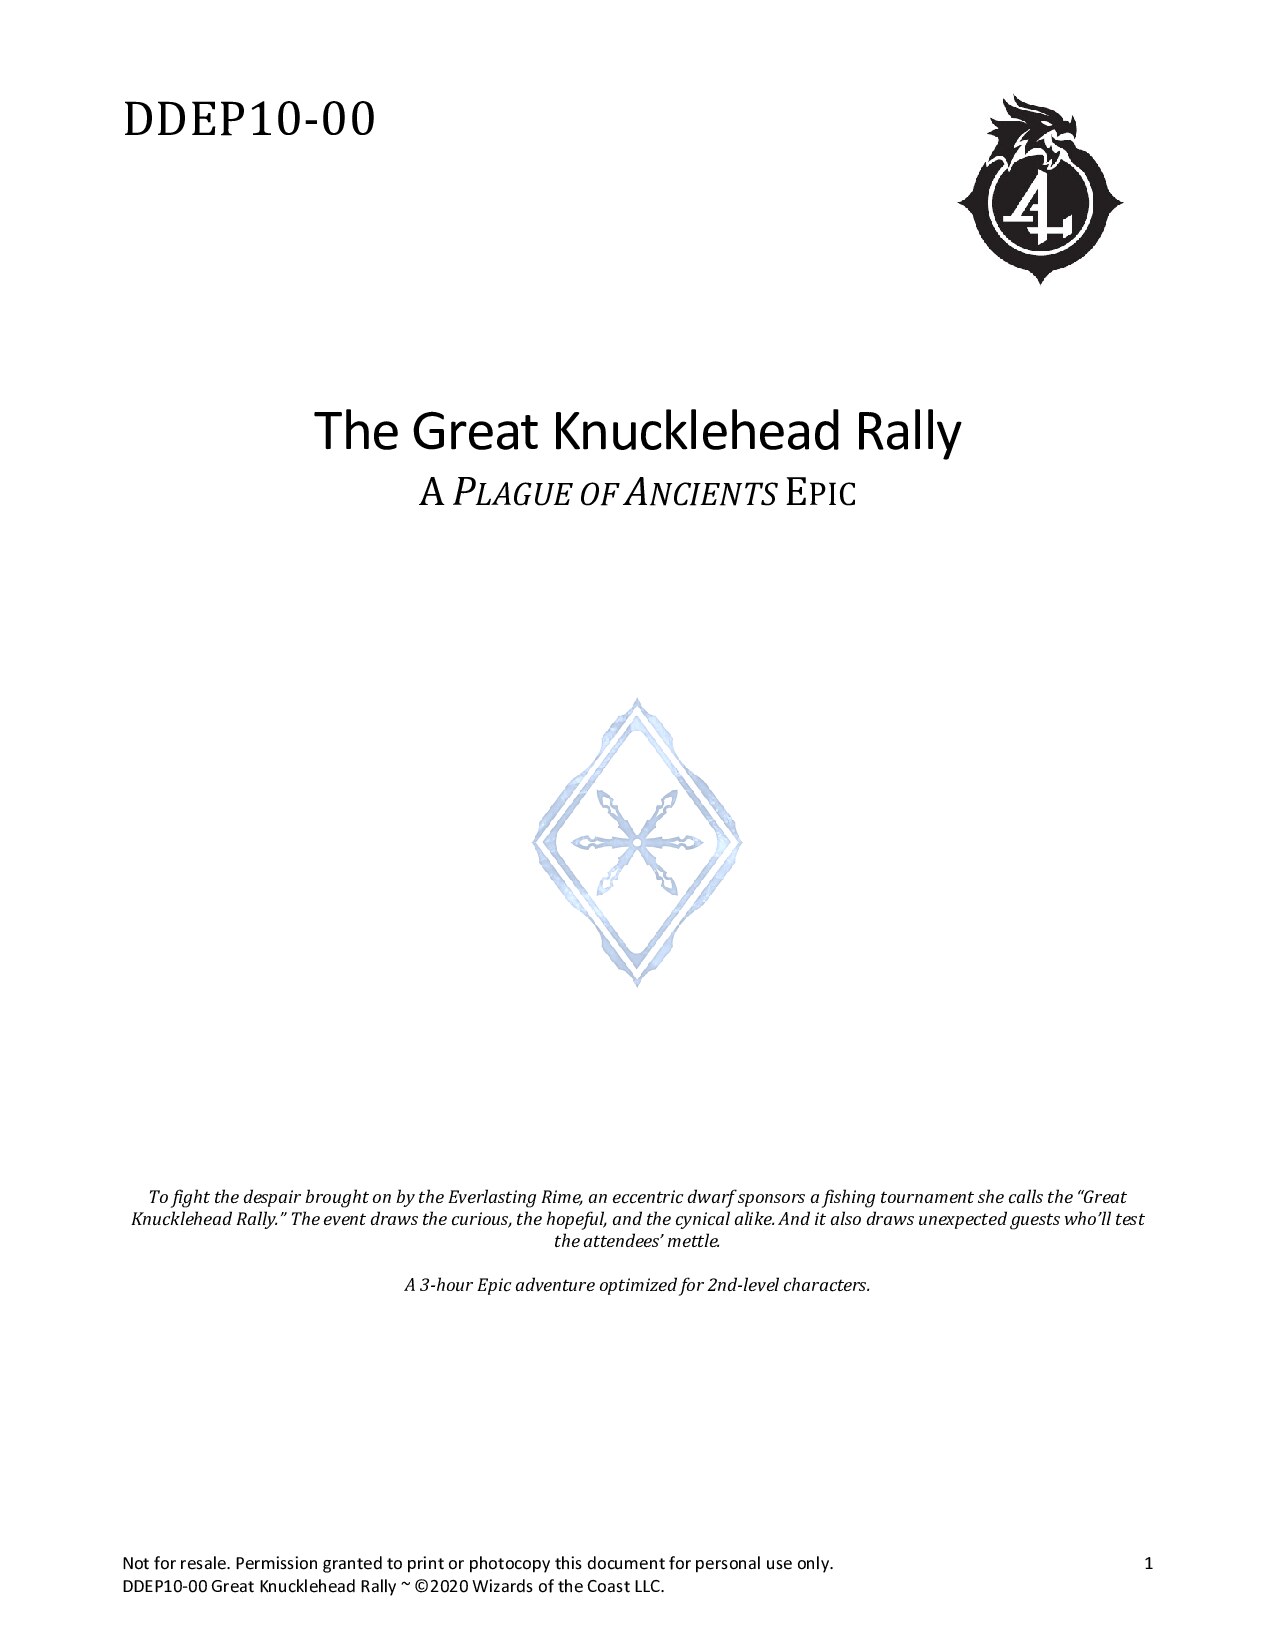 DDEP10-00 - The Great Knucklehead Rally